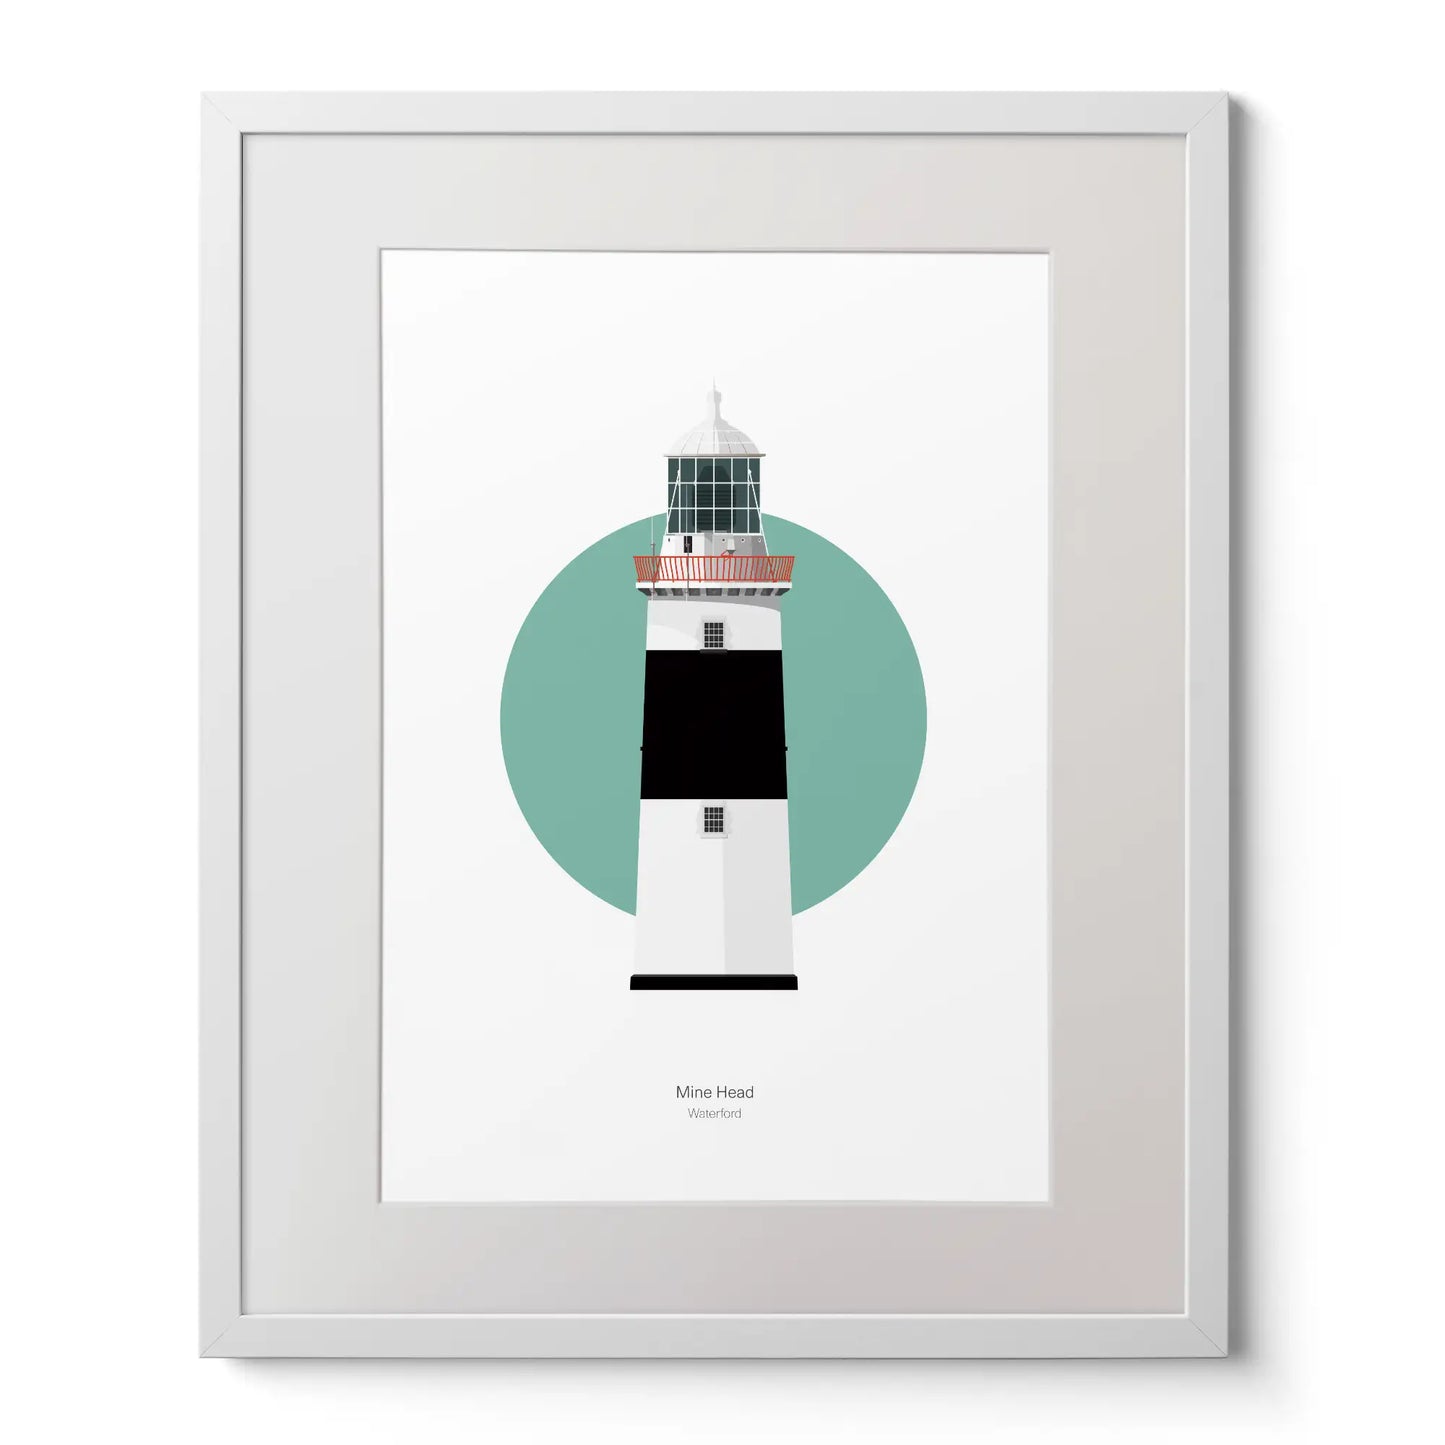 Wall hanging of Mine Head lighthouse on a white background inside light blue square,  in a white frame measuring 40x50cm.